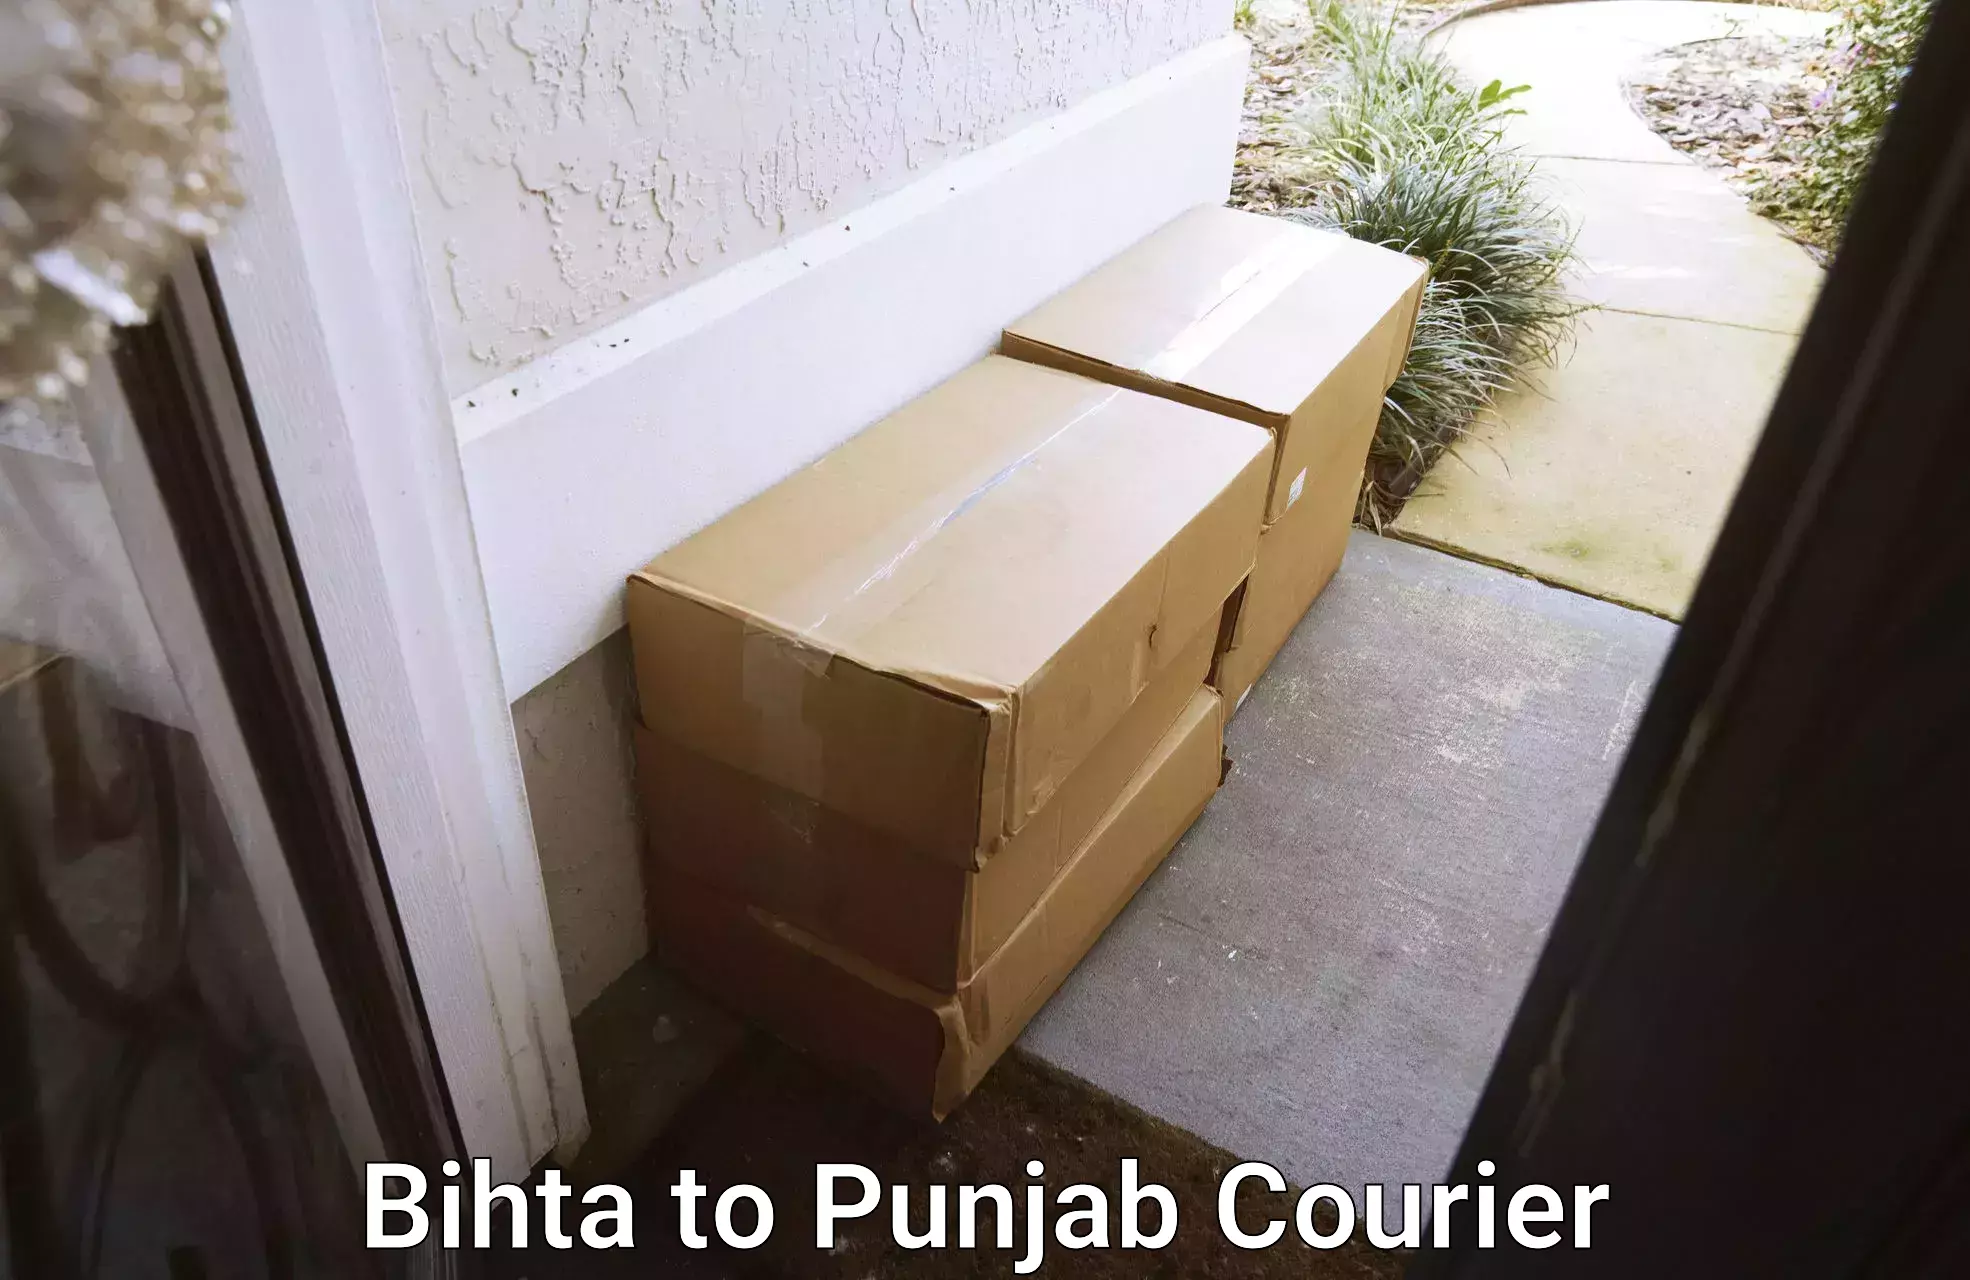 High-quality moving services Bihta to Punjab